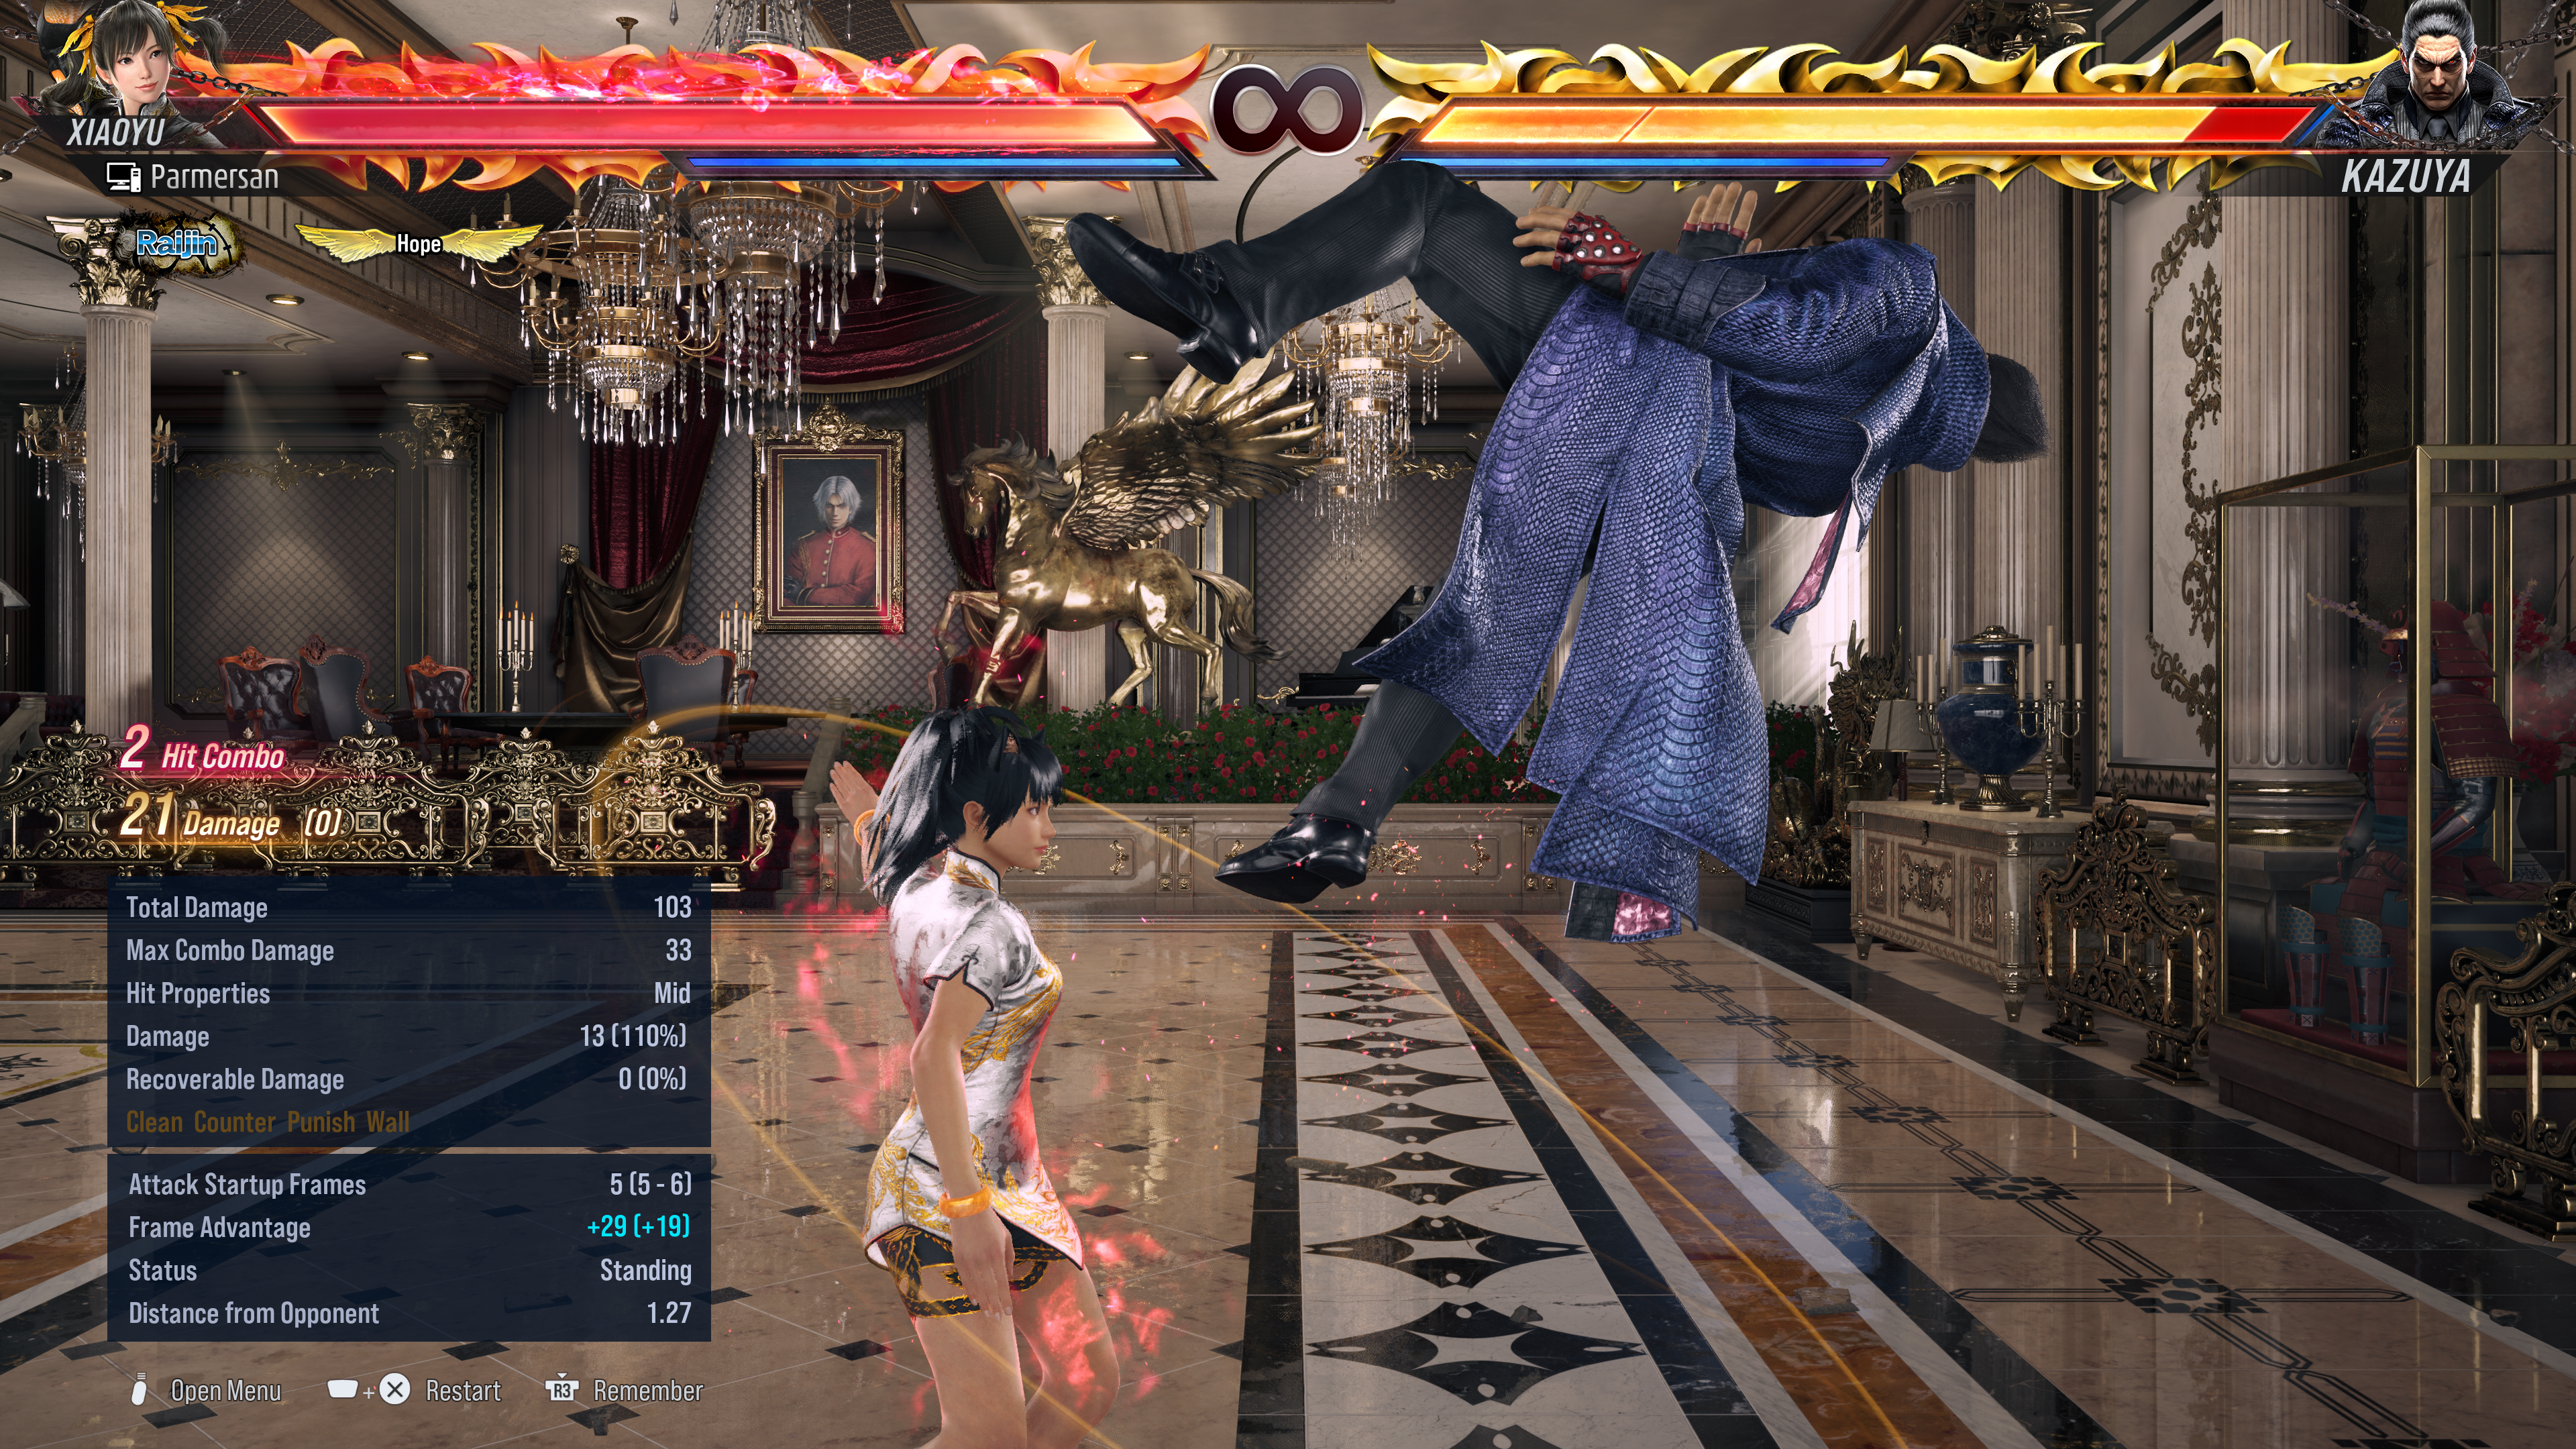 Stats and other Information Displayed in Practice Mode (Training Mode) in Tekken 8